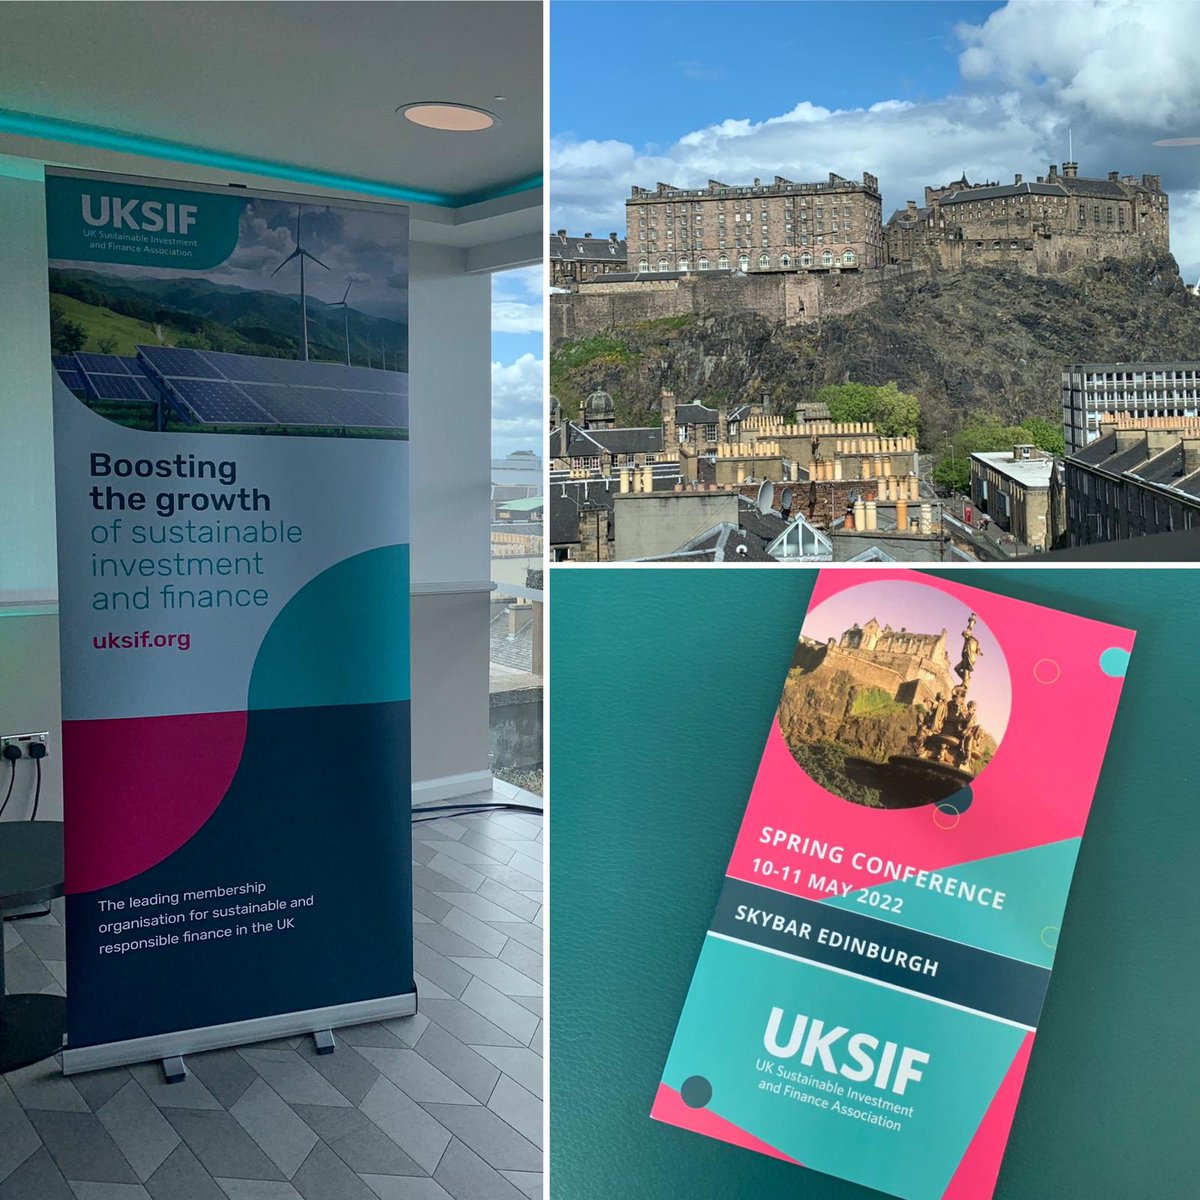 Great 1st day at @UKSIF Spring Conference. Excellent speakers on a range of #sustainable topics, frm UKSIF’s Net Zero Inquiry, to FS’s role & influence on Human Rights & Biodiversity Loss, to role & scope of #data in evidencing sustainable achievements. Looking forward to Day 2!